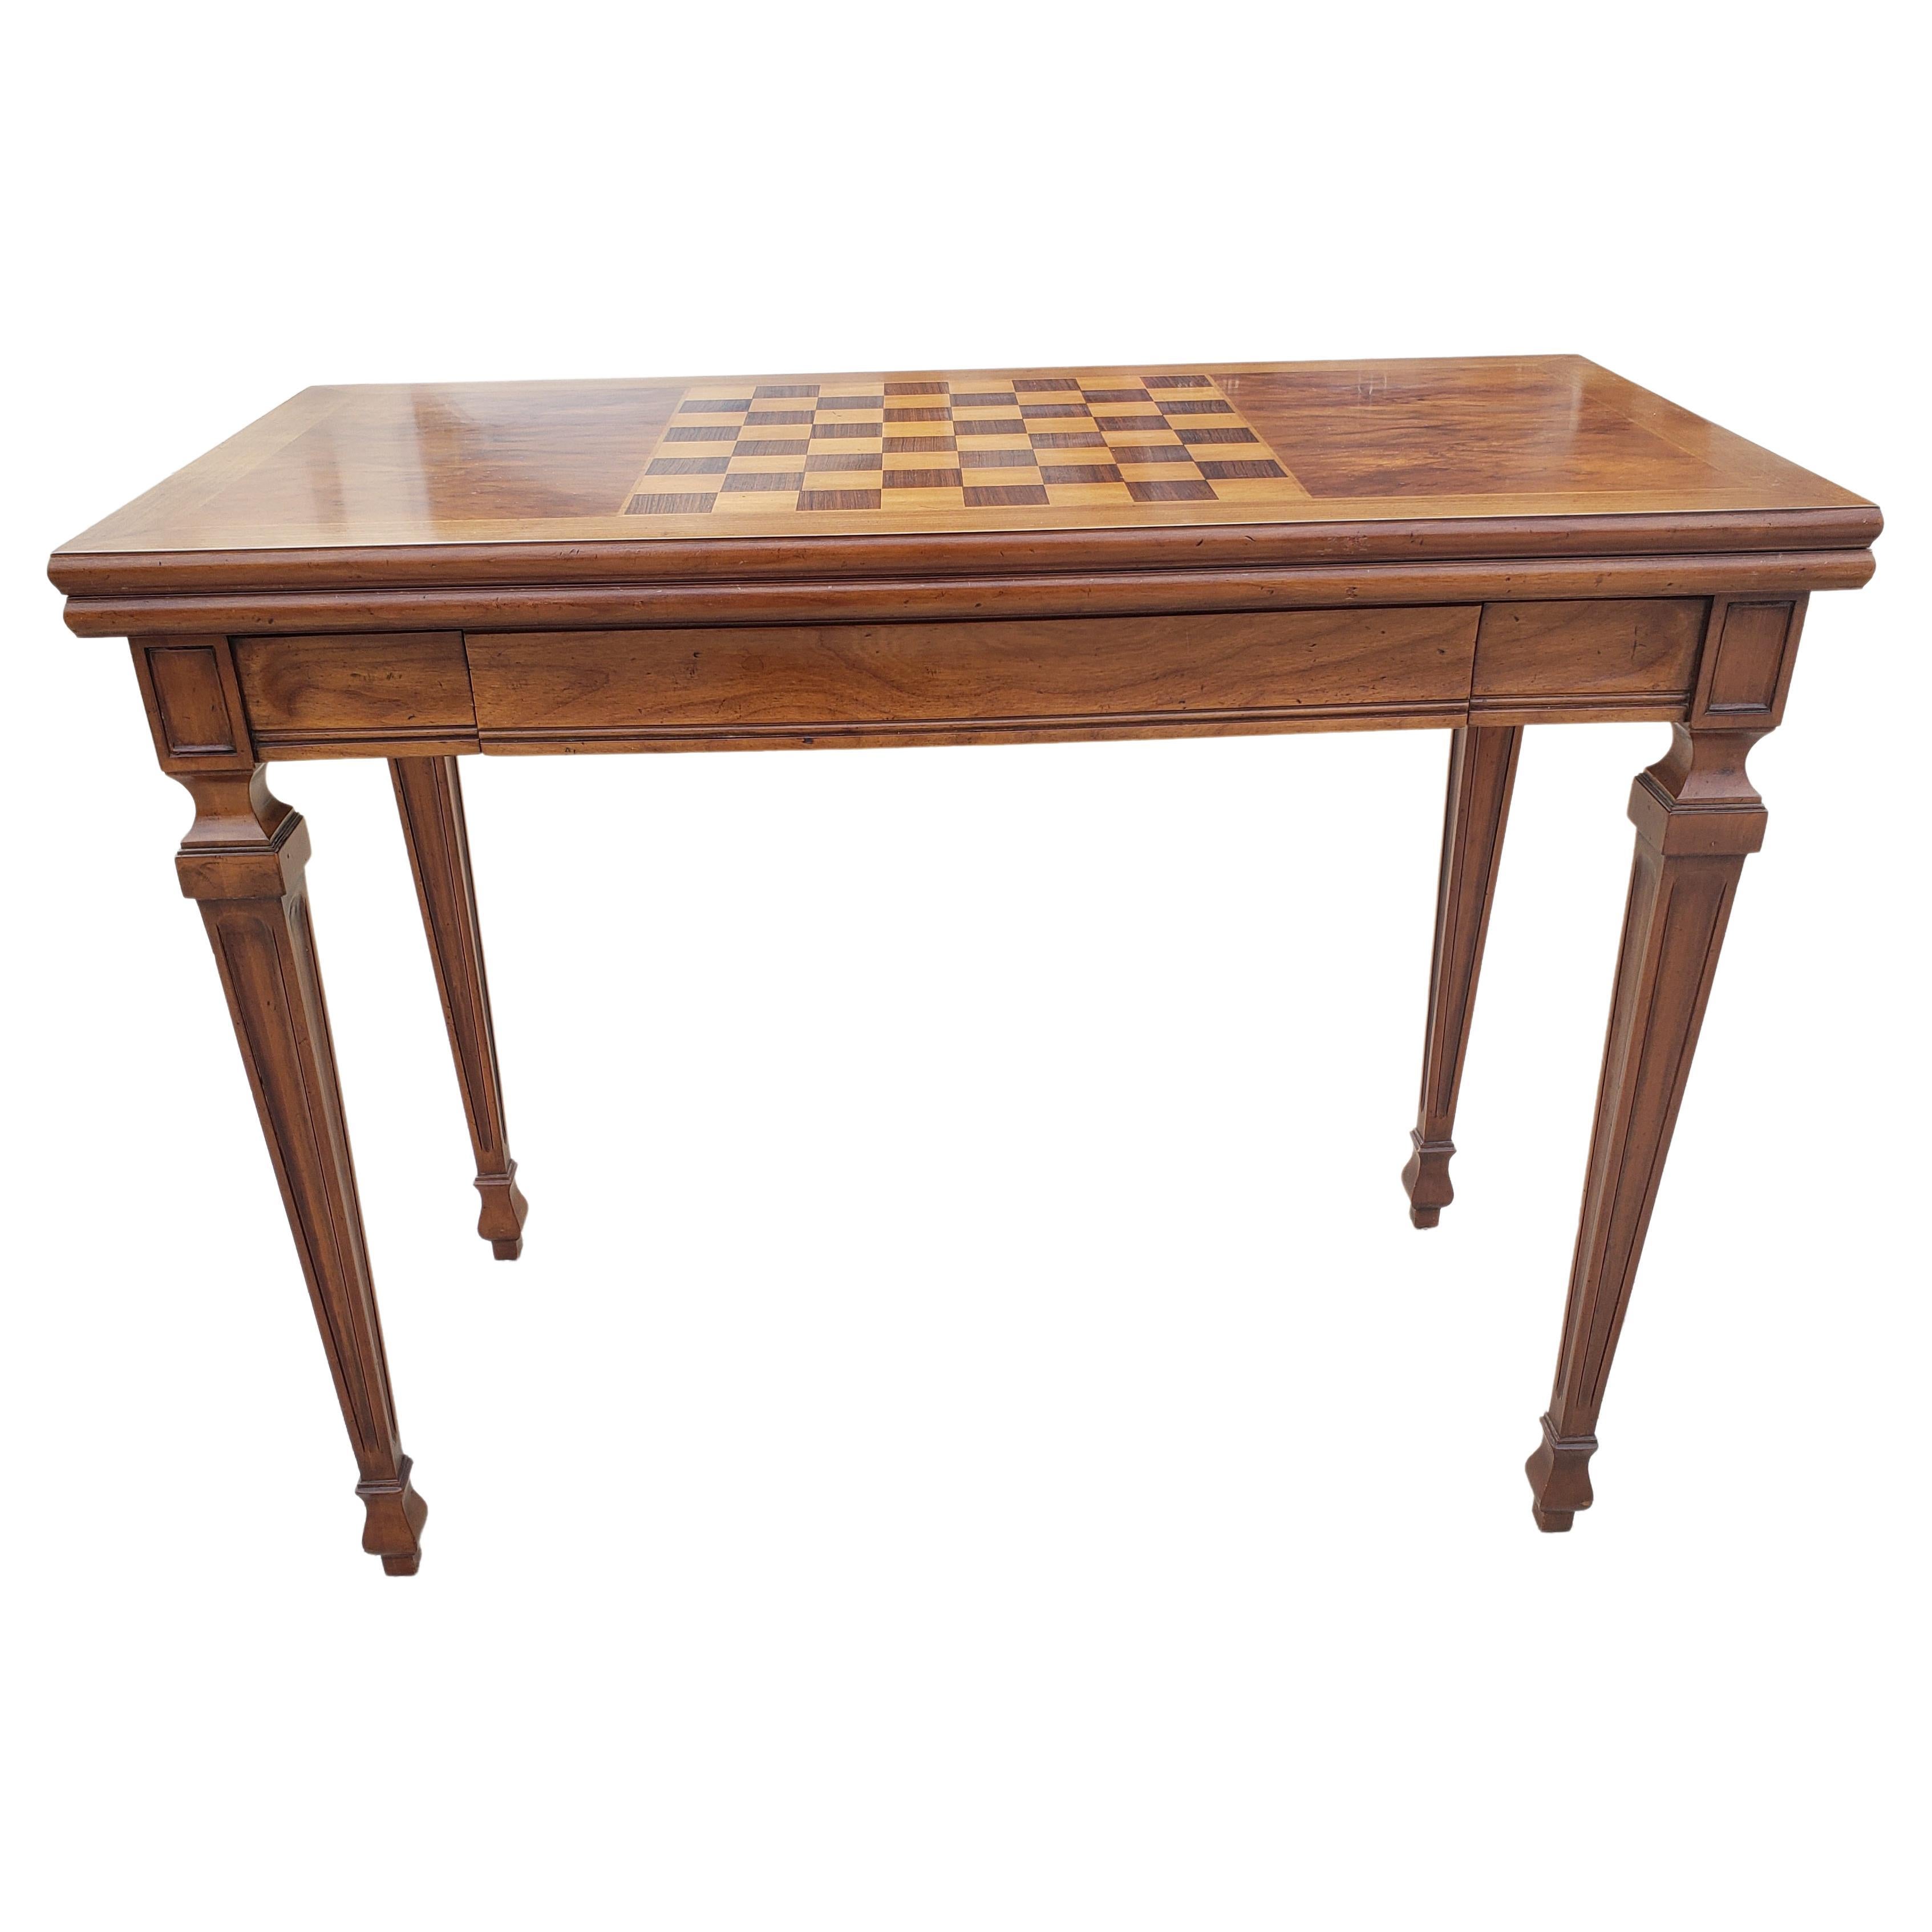 Beautiful John Widdicomb solid walnut and satinwood Marquetry console or game table.
Iconic watertown slides to pull from the back and flip top for game table, card table or small dining card table. Large drawer for storage.
Top chess board with